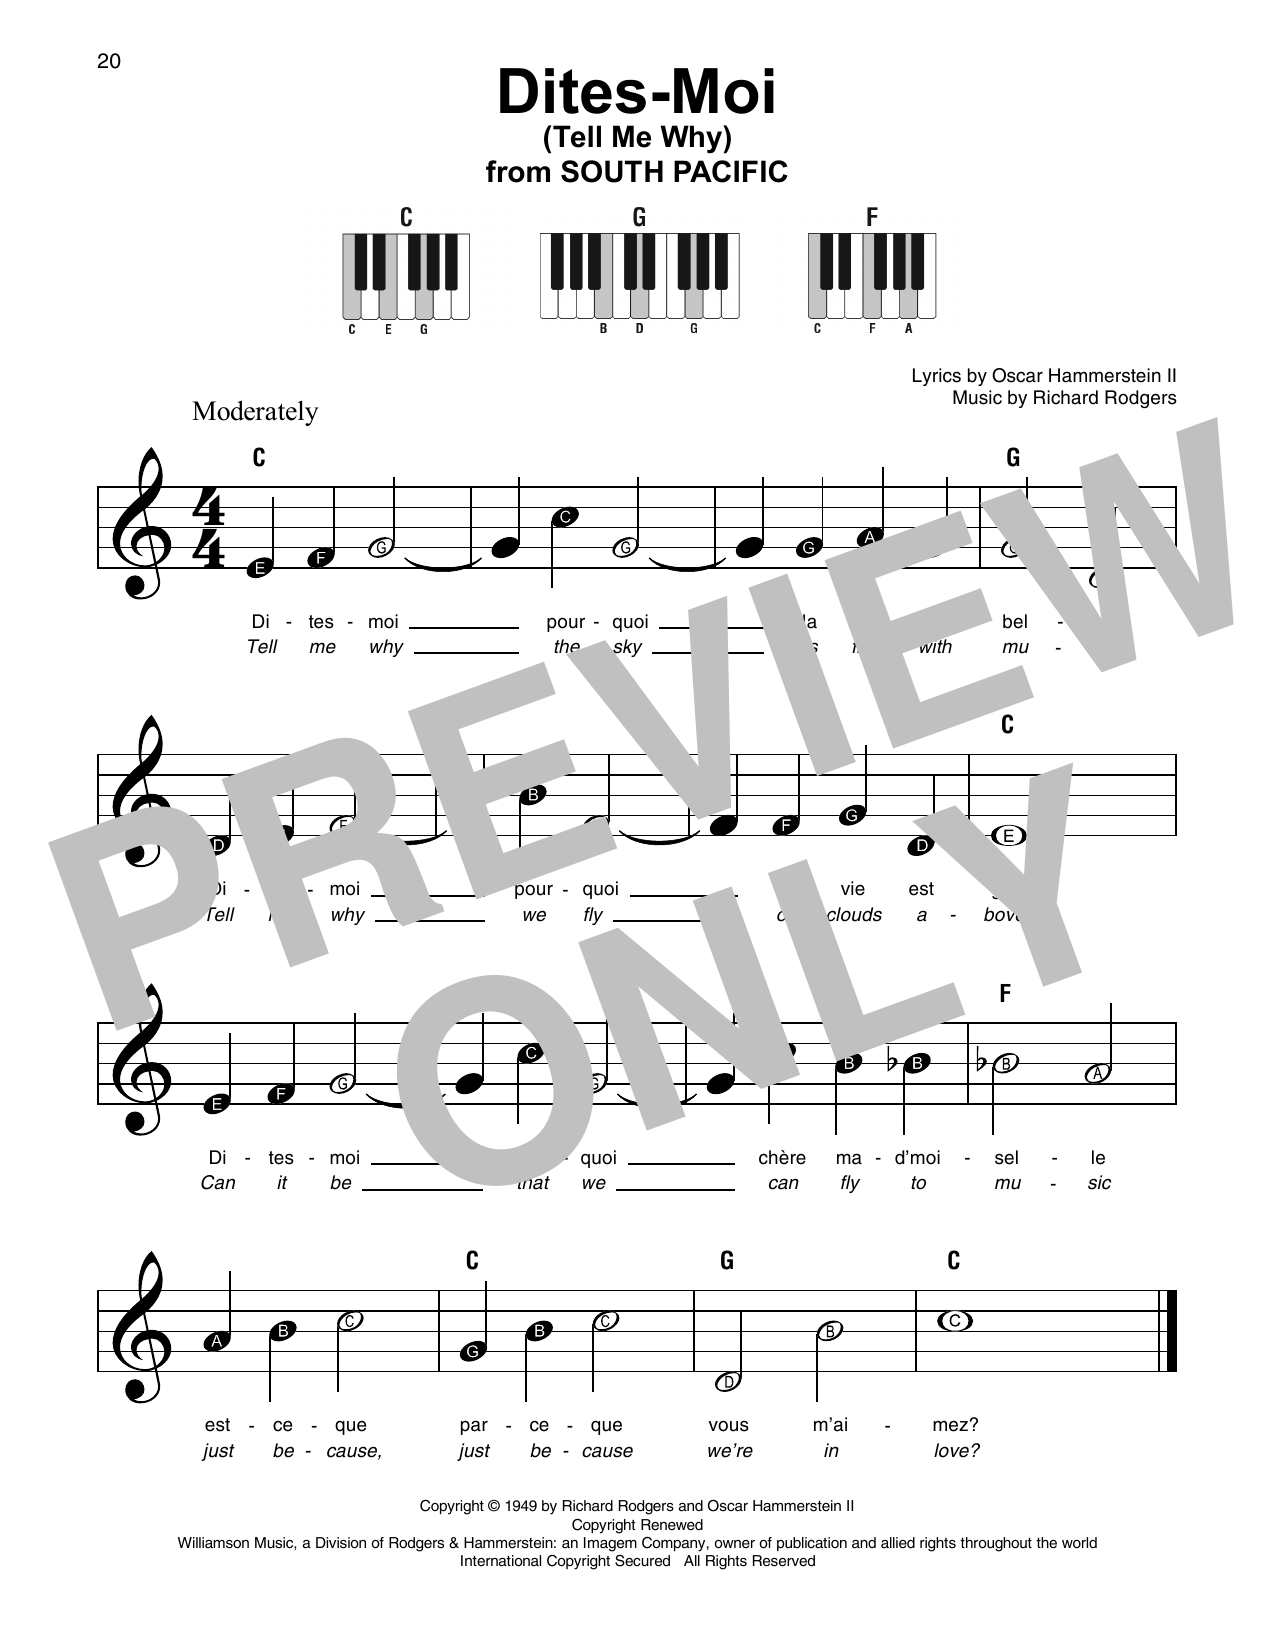 Download Rodgers & Hammerstein Dites-Moi (Tell Me Why) Sheet Music